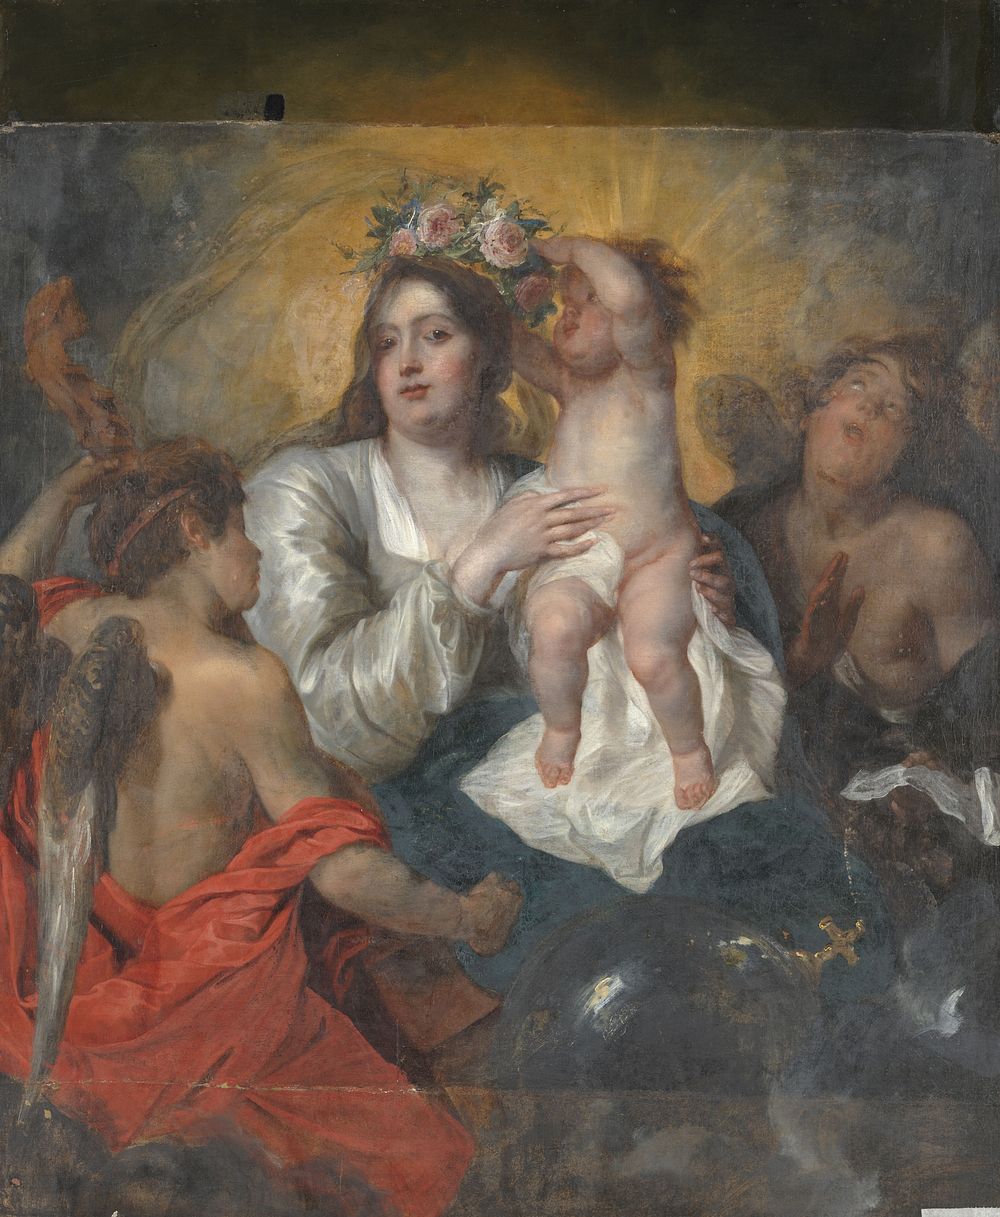 The Virgin Crowned by the Infant Christ (in or after c. 1646) by Thomas Willeboirts Bosschaert and José Antolínez